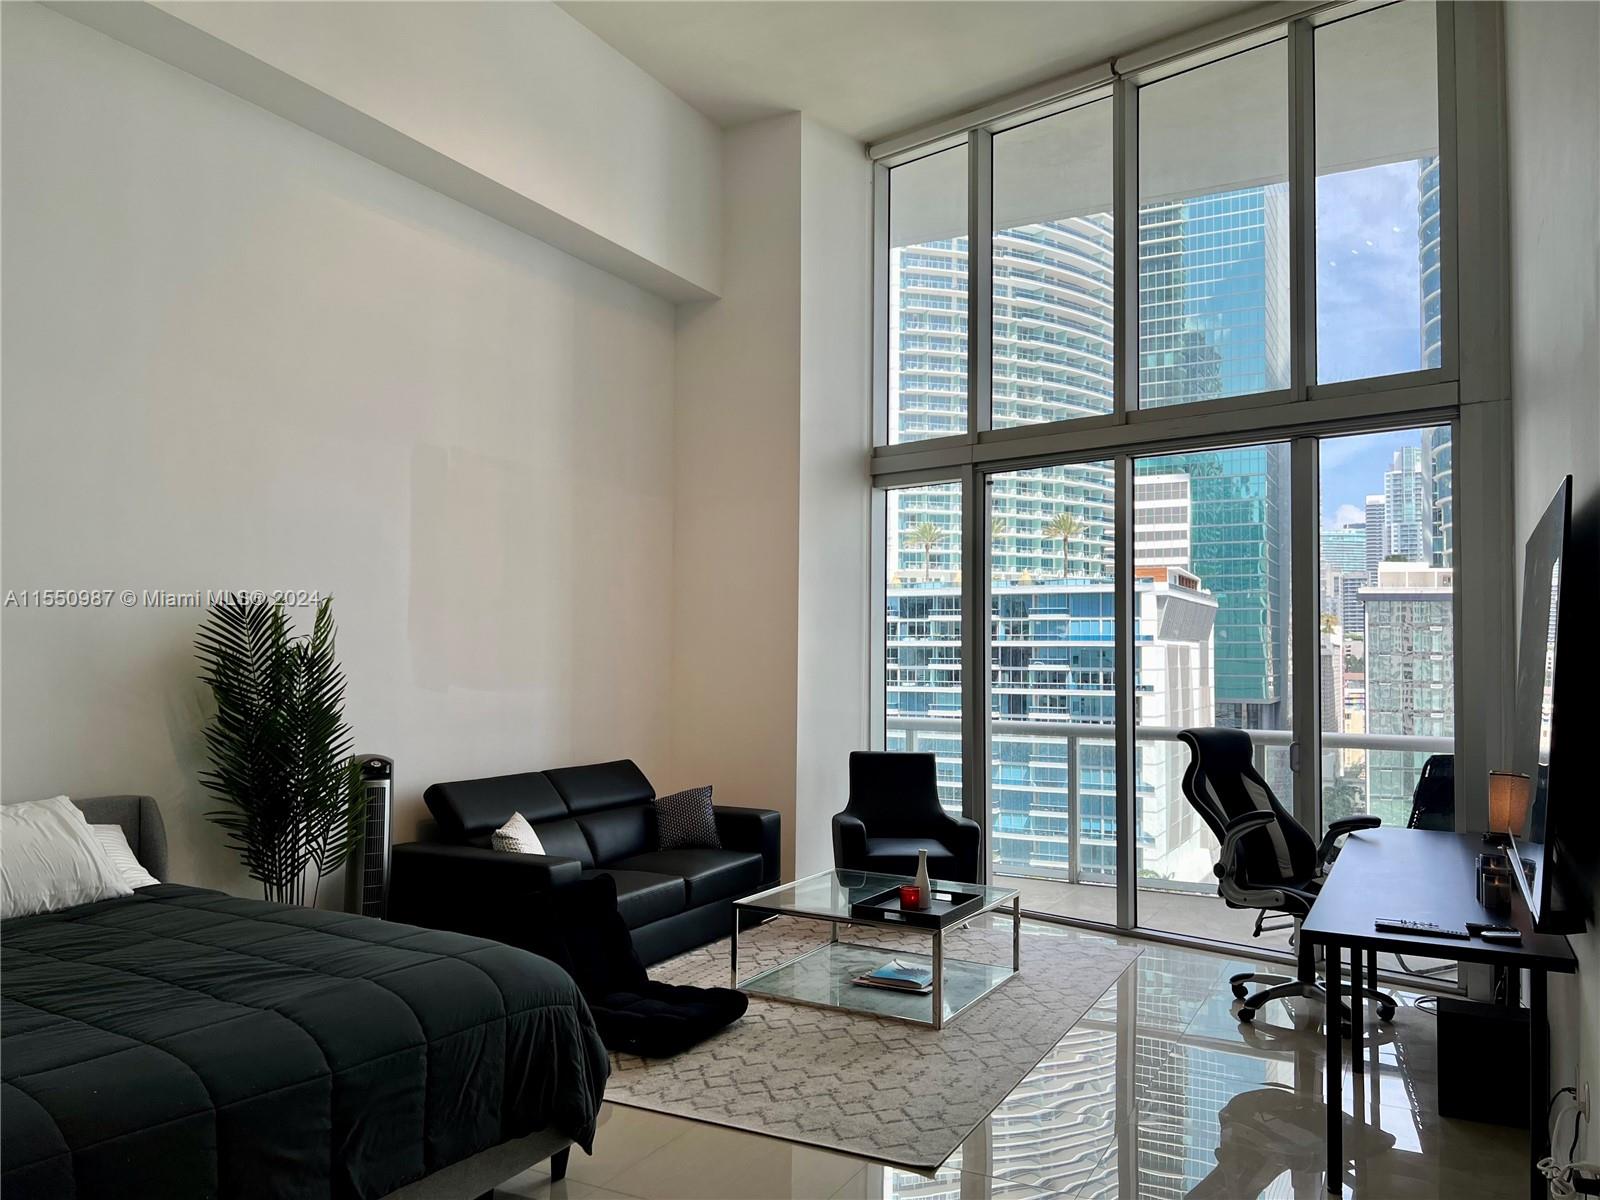 Enjoy waterfront living from this stunning double height ceiling studio residence in the heart of Miami. Features an abundance of natural light and picturesque city & river views from your private balcony. This unit offers top of the line Bosch and Wolf appliances, spacious bathroom with tub. 1 assigned parking space. Walkability 10+, short distance to the best restaurants, bars, cafes, Brickell City Center and much more. Icon Brickell designed by Philippe Stracks offers 5-star amenities, resort style pool, fitness center, spa, multiple top restaurants onsite & much more. Fully Furnished.